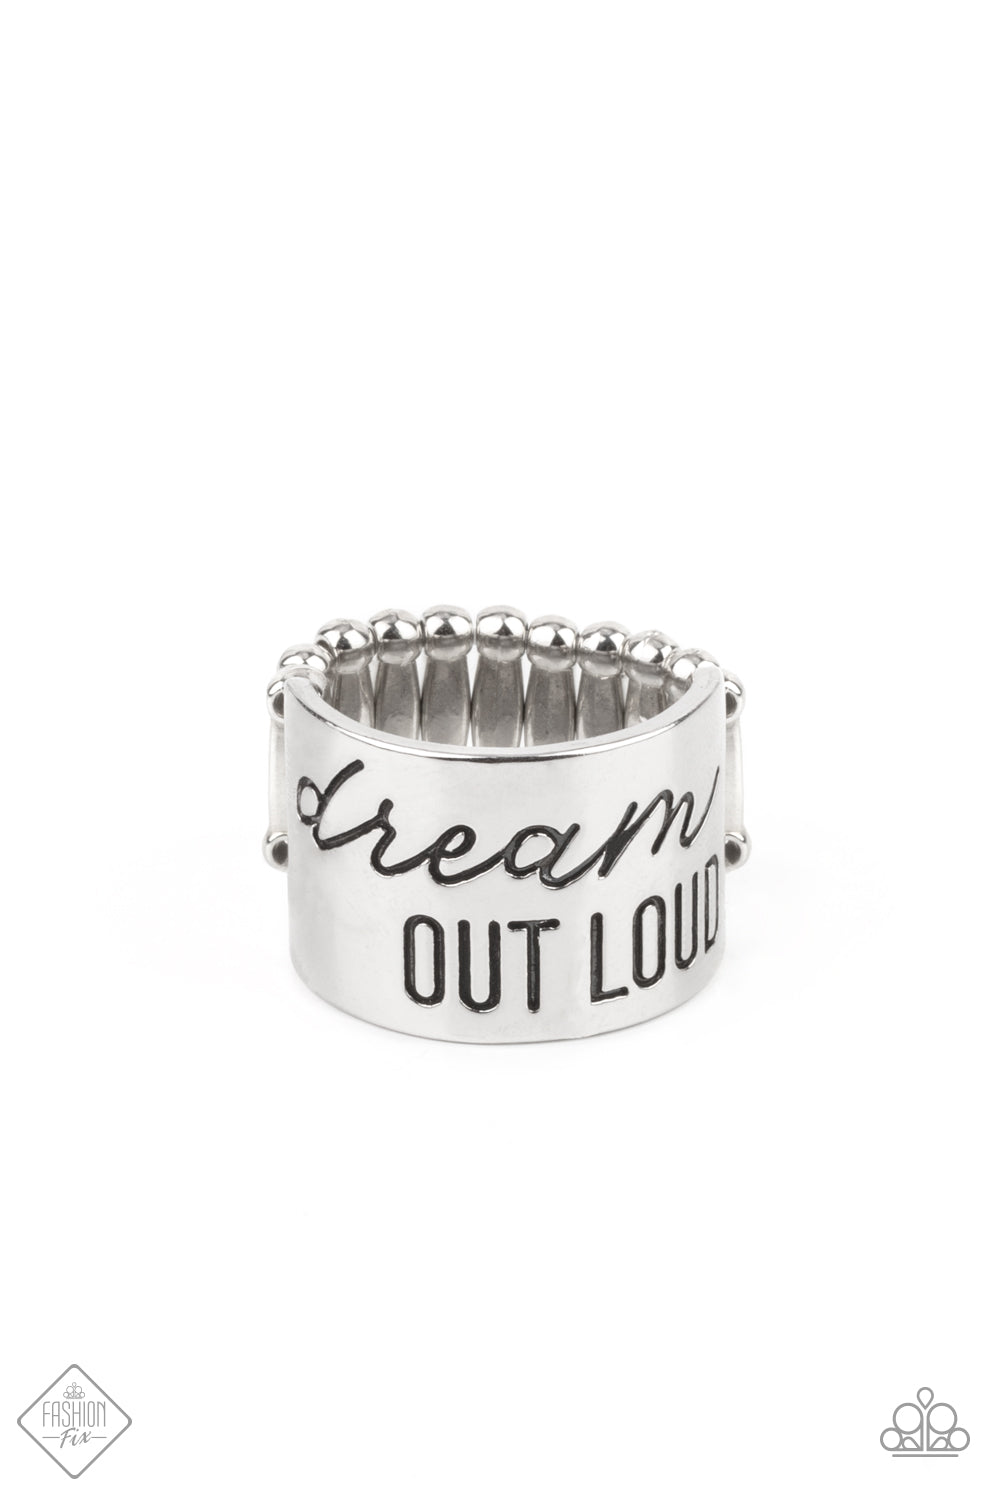 Dream Louder Silver Ring - Paparazzi Accessories  The front of a thick silver band is stamped in the phrase, "Dream out loud," creating an inspirational centerpiece across the finger. Features a stretchy band for a flexible fit.  All Paparazzi Accessories are lead free and nickel free!  Sold as one individual ring.